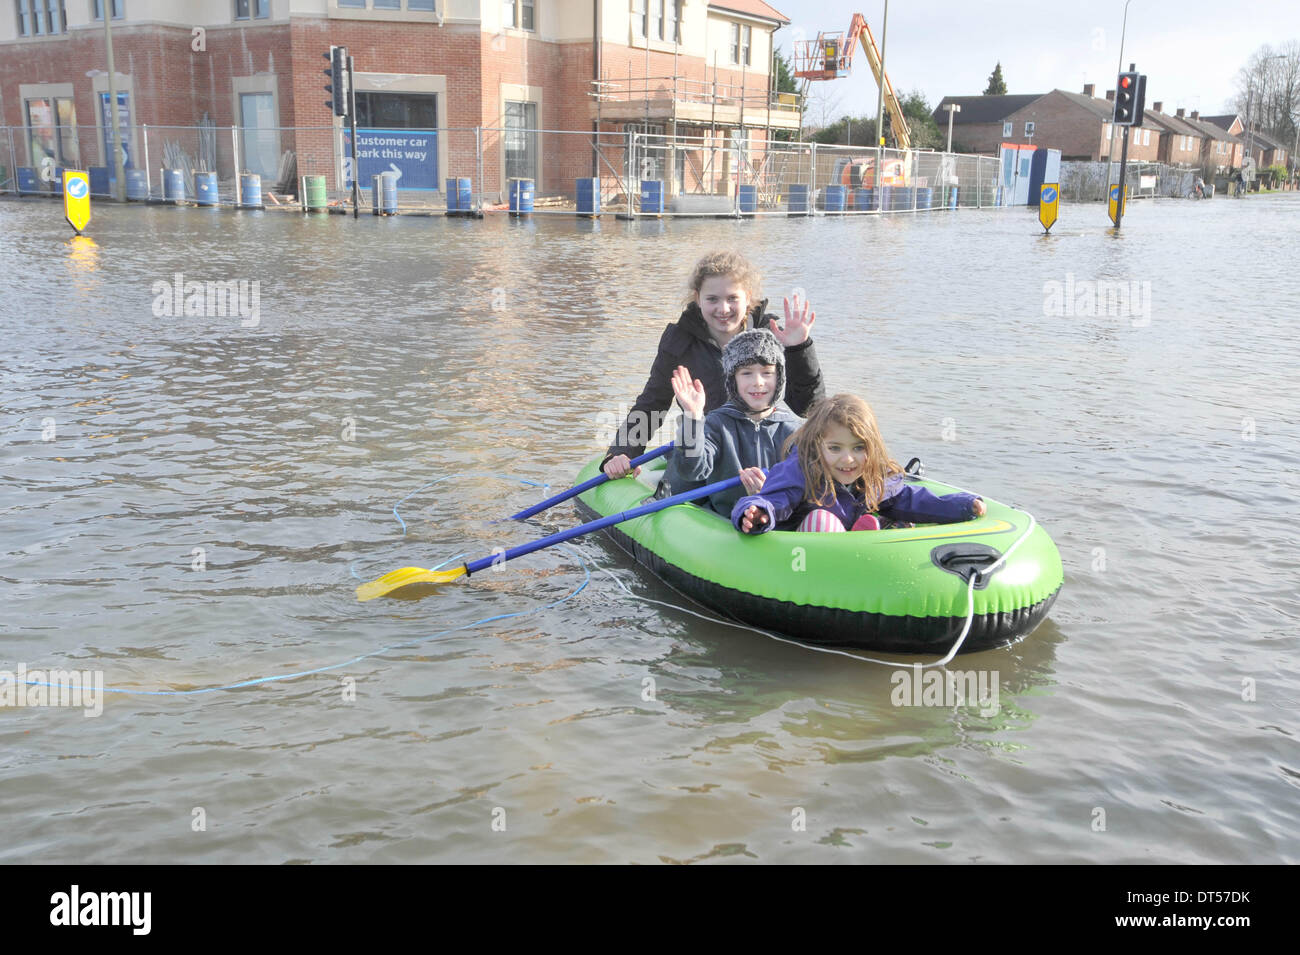 Oxford, UK. 9th Feb, 2014. Boating on the flooded Abingdon Road in Oxford today Back to front: Isabella Bowley 12, Max Bridson -Jones 8, Lucia Bowley 6, in a dinghy. The stormy winter weather has caused widespread flooding across the South and West of the UK. Credit:  Denis Kennedy/Alamy Live News Stock Photo